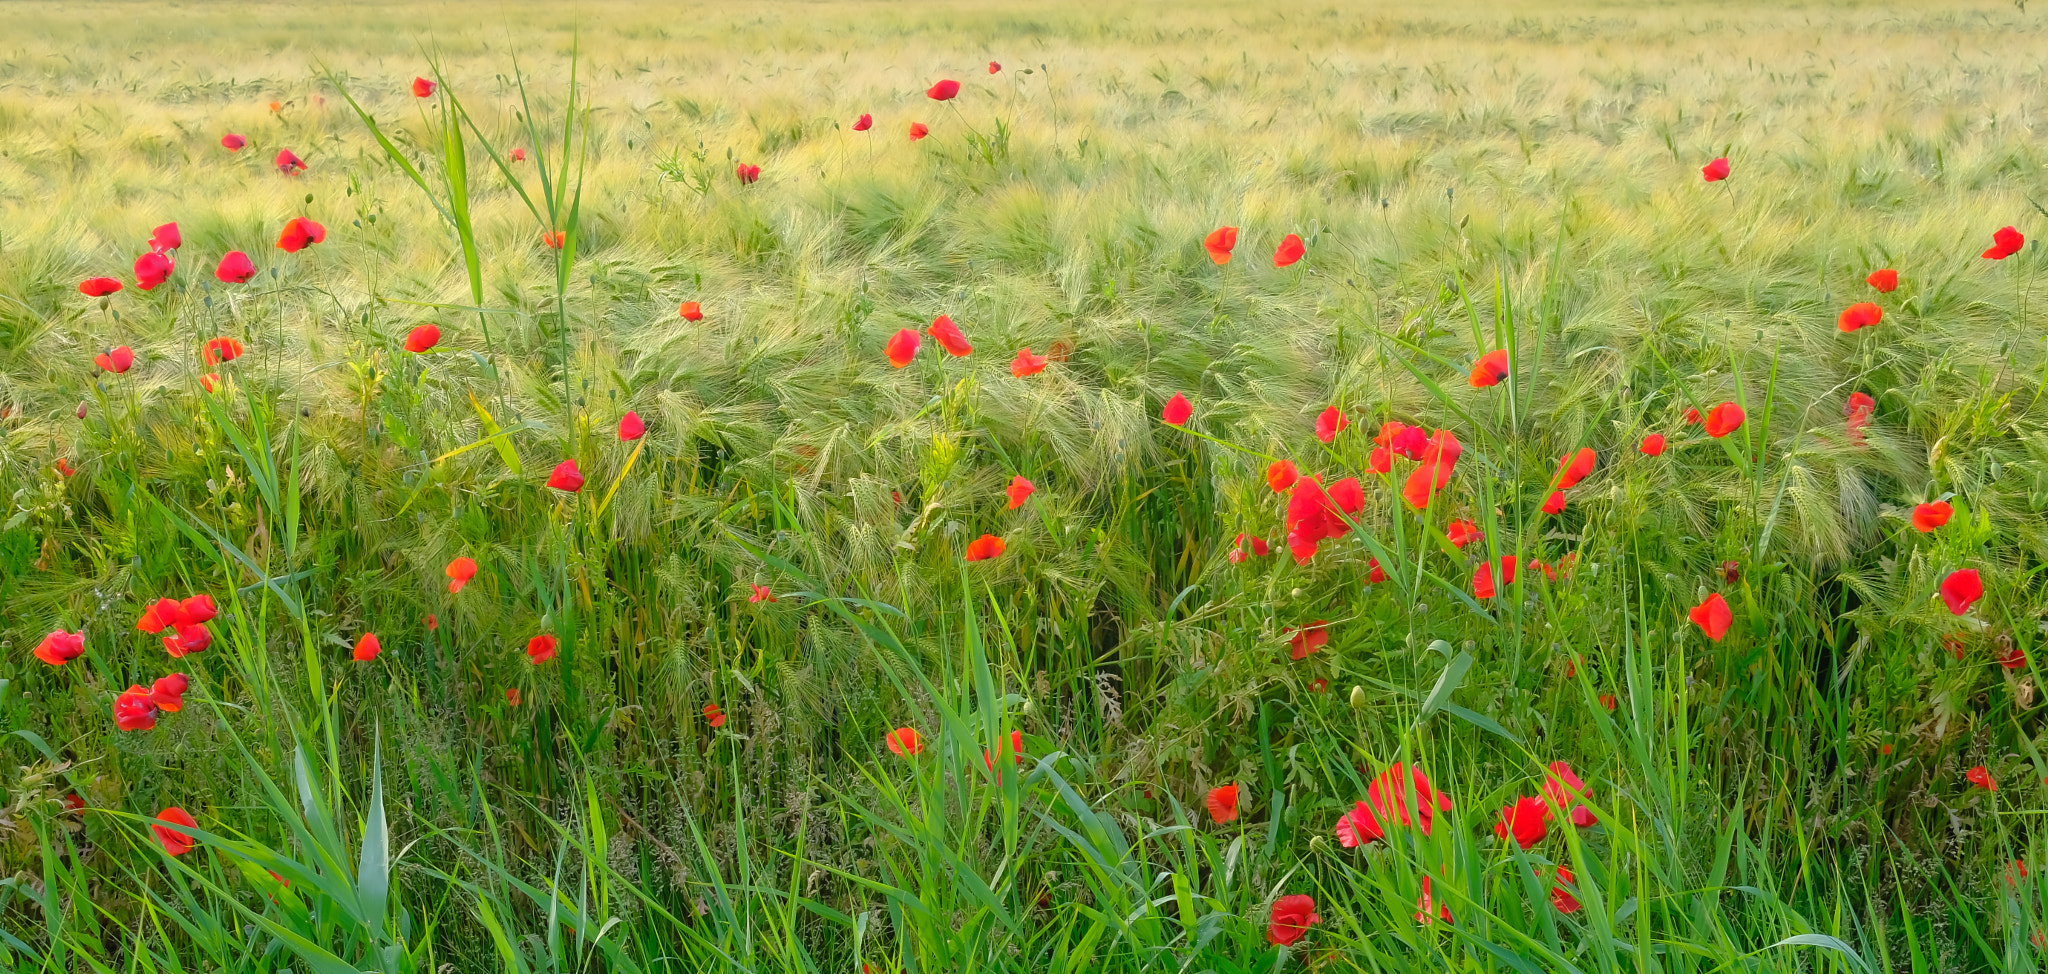 poppies, lots of poppies